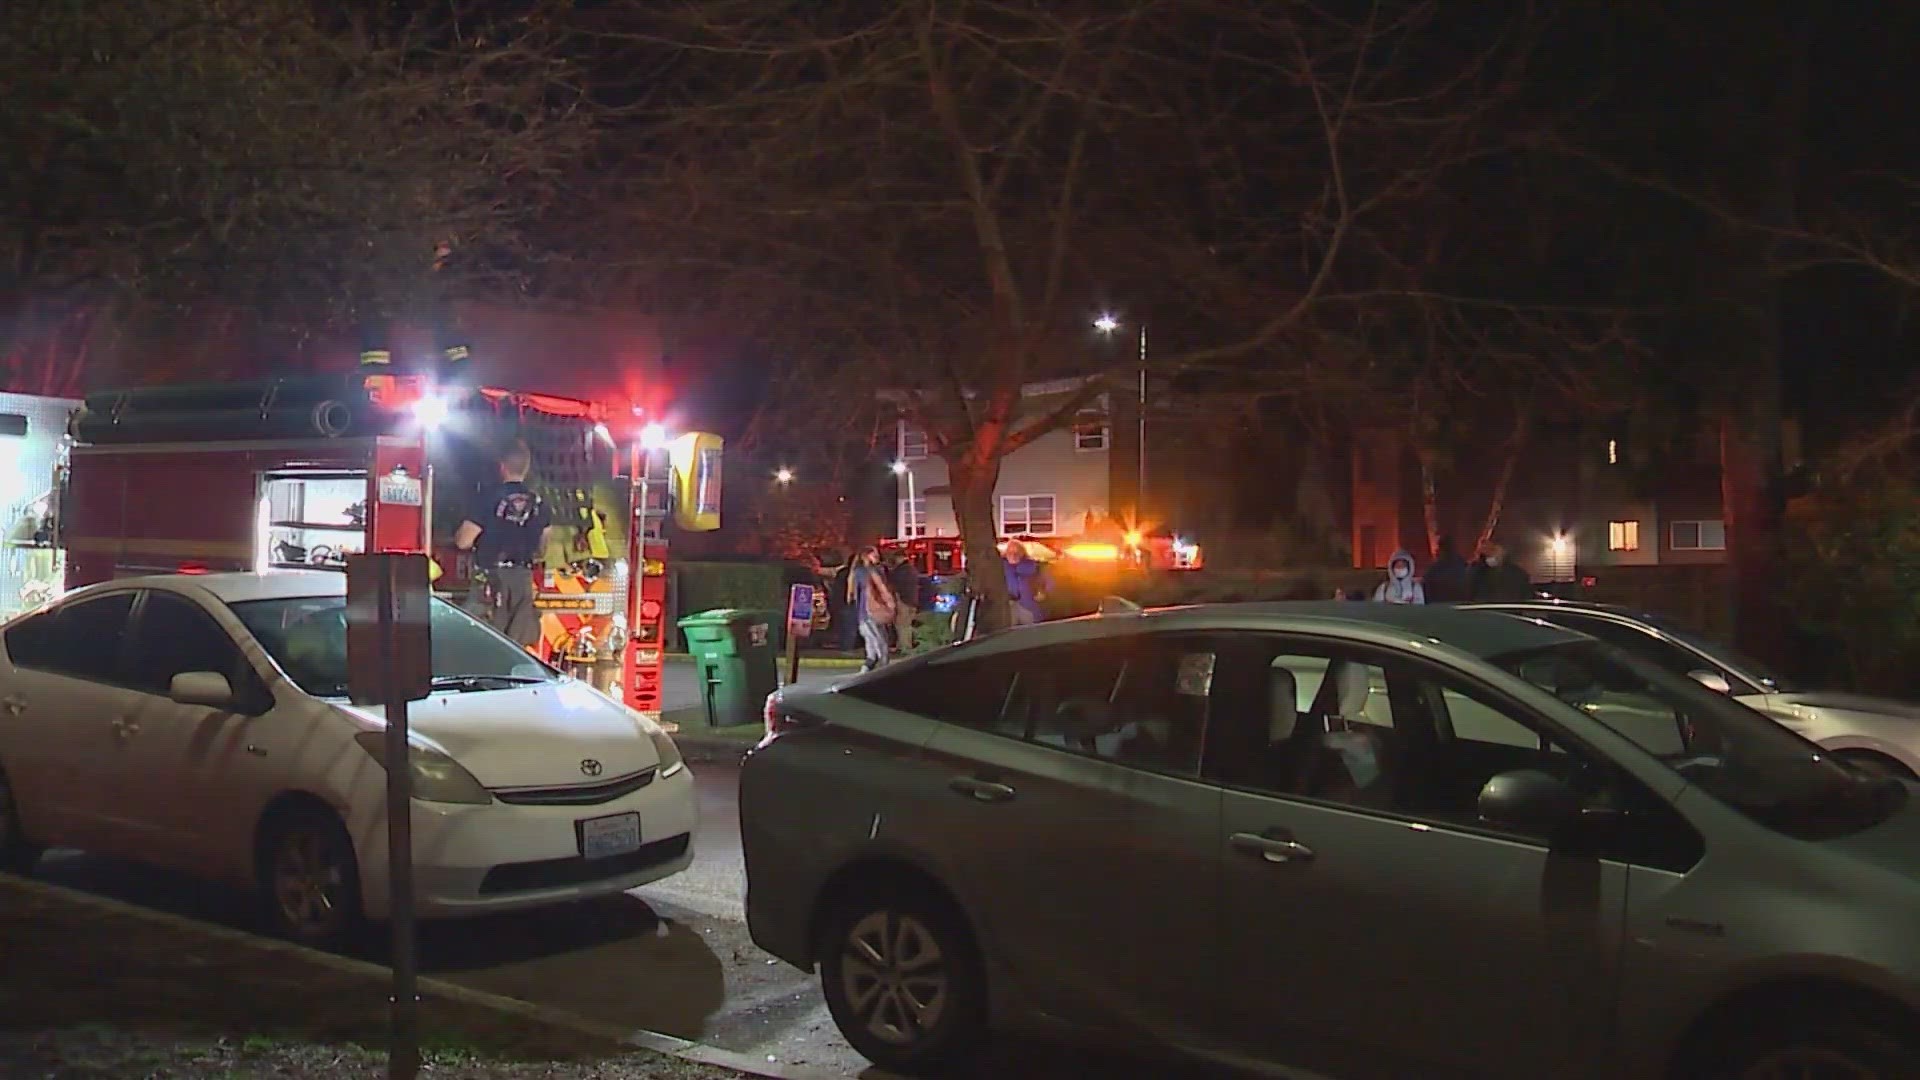 Two people and a dog were found dead after a fire at an apartment in Seattle's central district overnight.